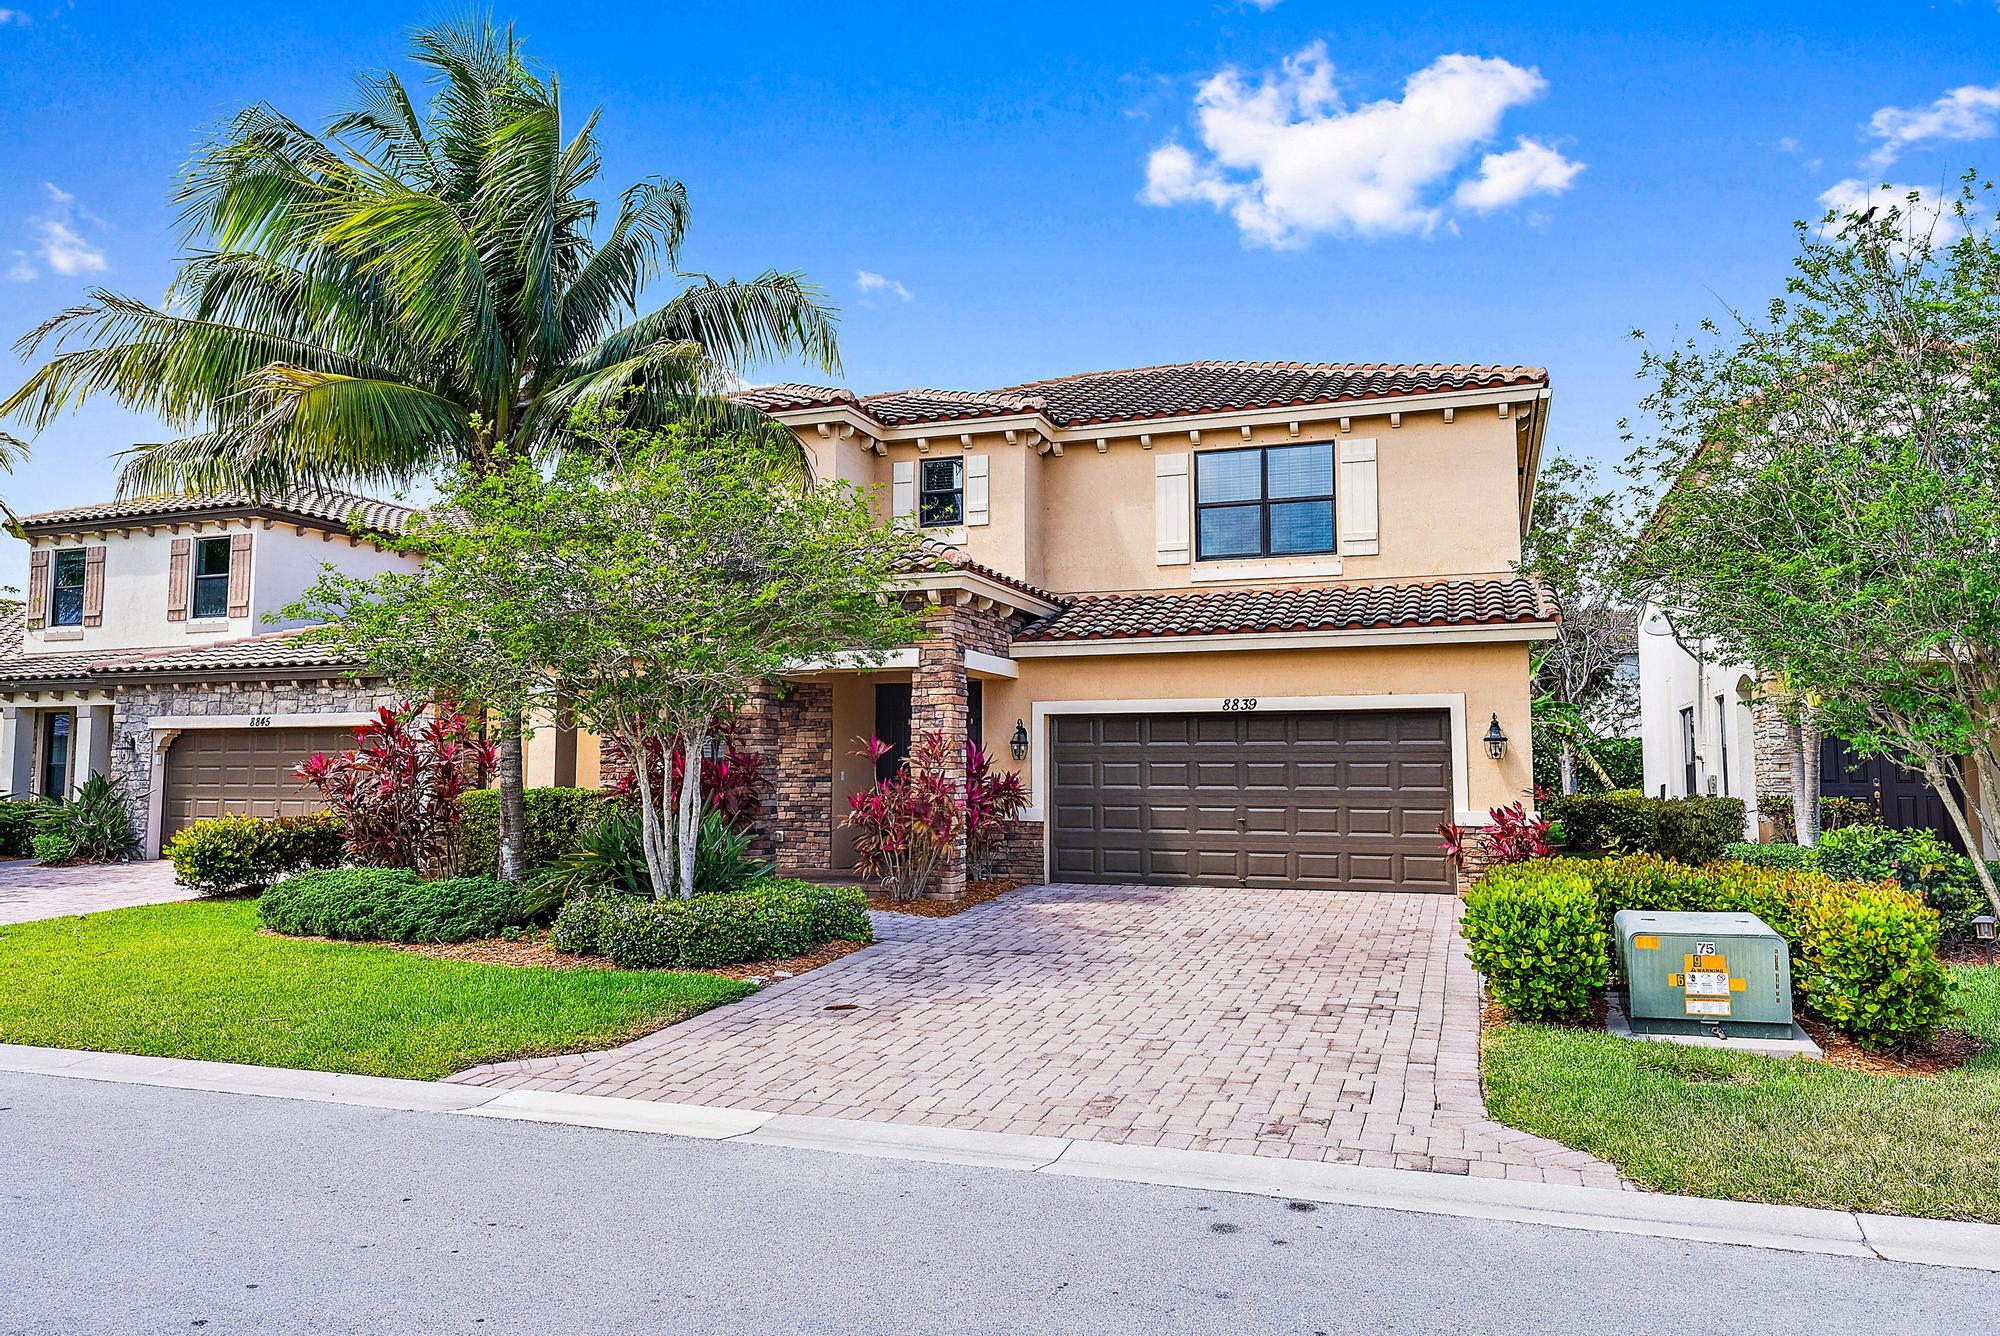 8839 Willow Cove Lane, Lake Worth, Palm Beach County, Florida - 4 Bedrooms  
3.5 Bathrooms - 